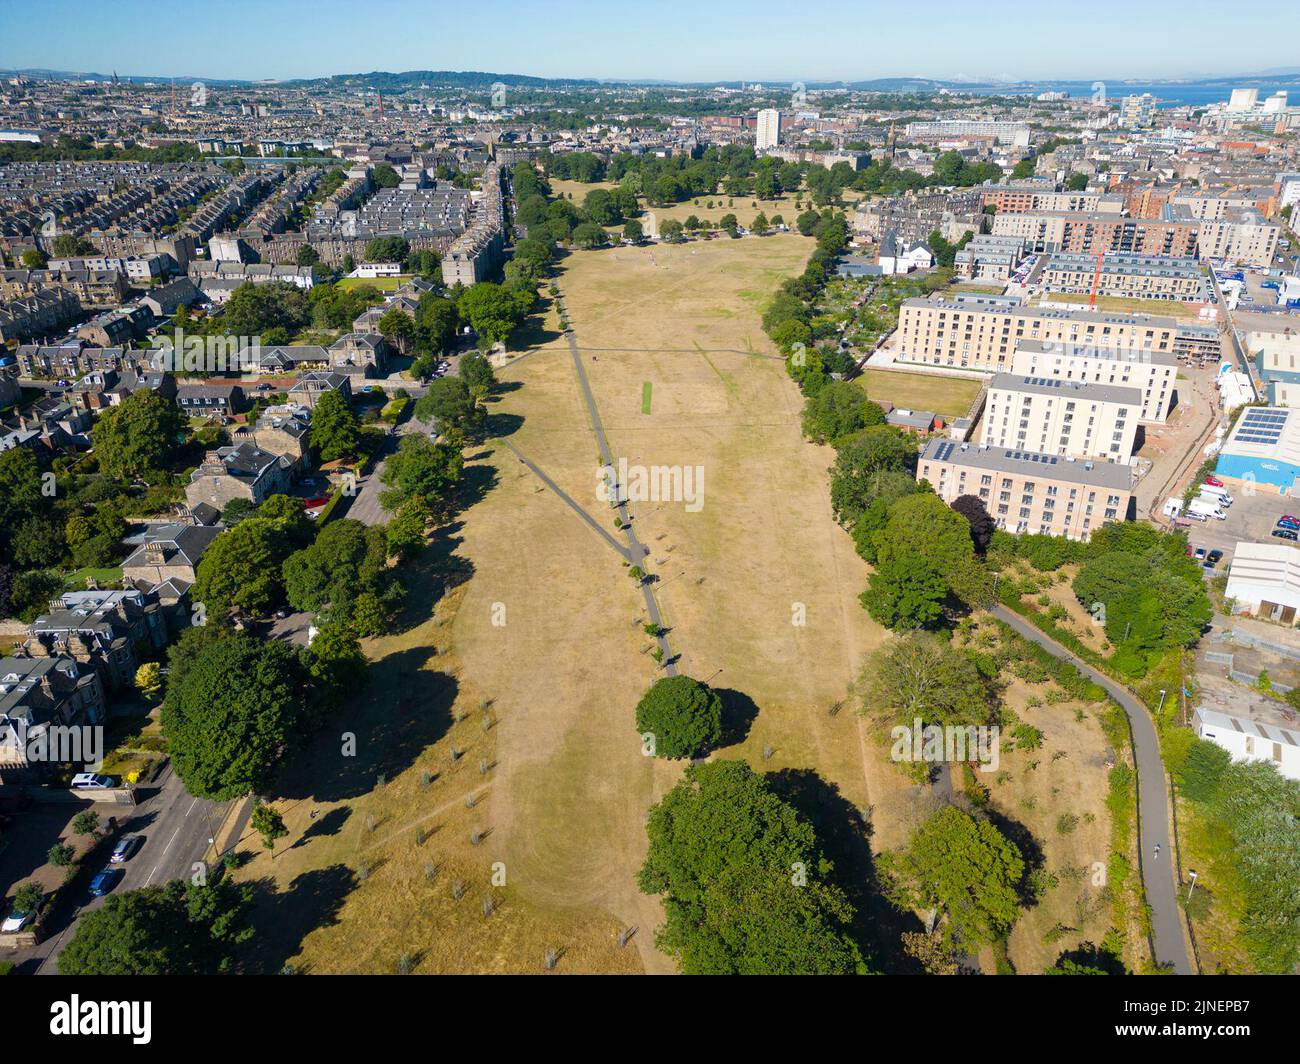 Edinburgh, Scotland, UK. 11th August 2022.  Aerial view of dry burned grass in Edinburgh parks caused by prolonged summer with low rainfall. Although drought conditions are not as severe as in southern England, recent  low rainfall is causing concern in many parts of Scotland. Pic; The grass in Leith Links park is parched and yellow.  Iain Masterton/Alamy Live News Stock Photo